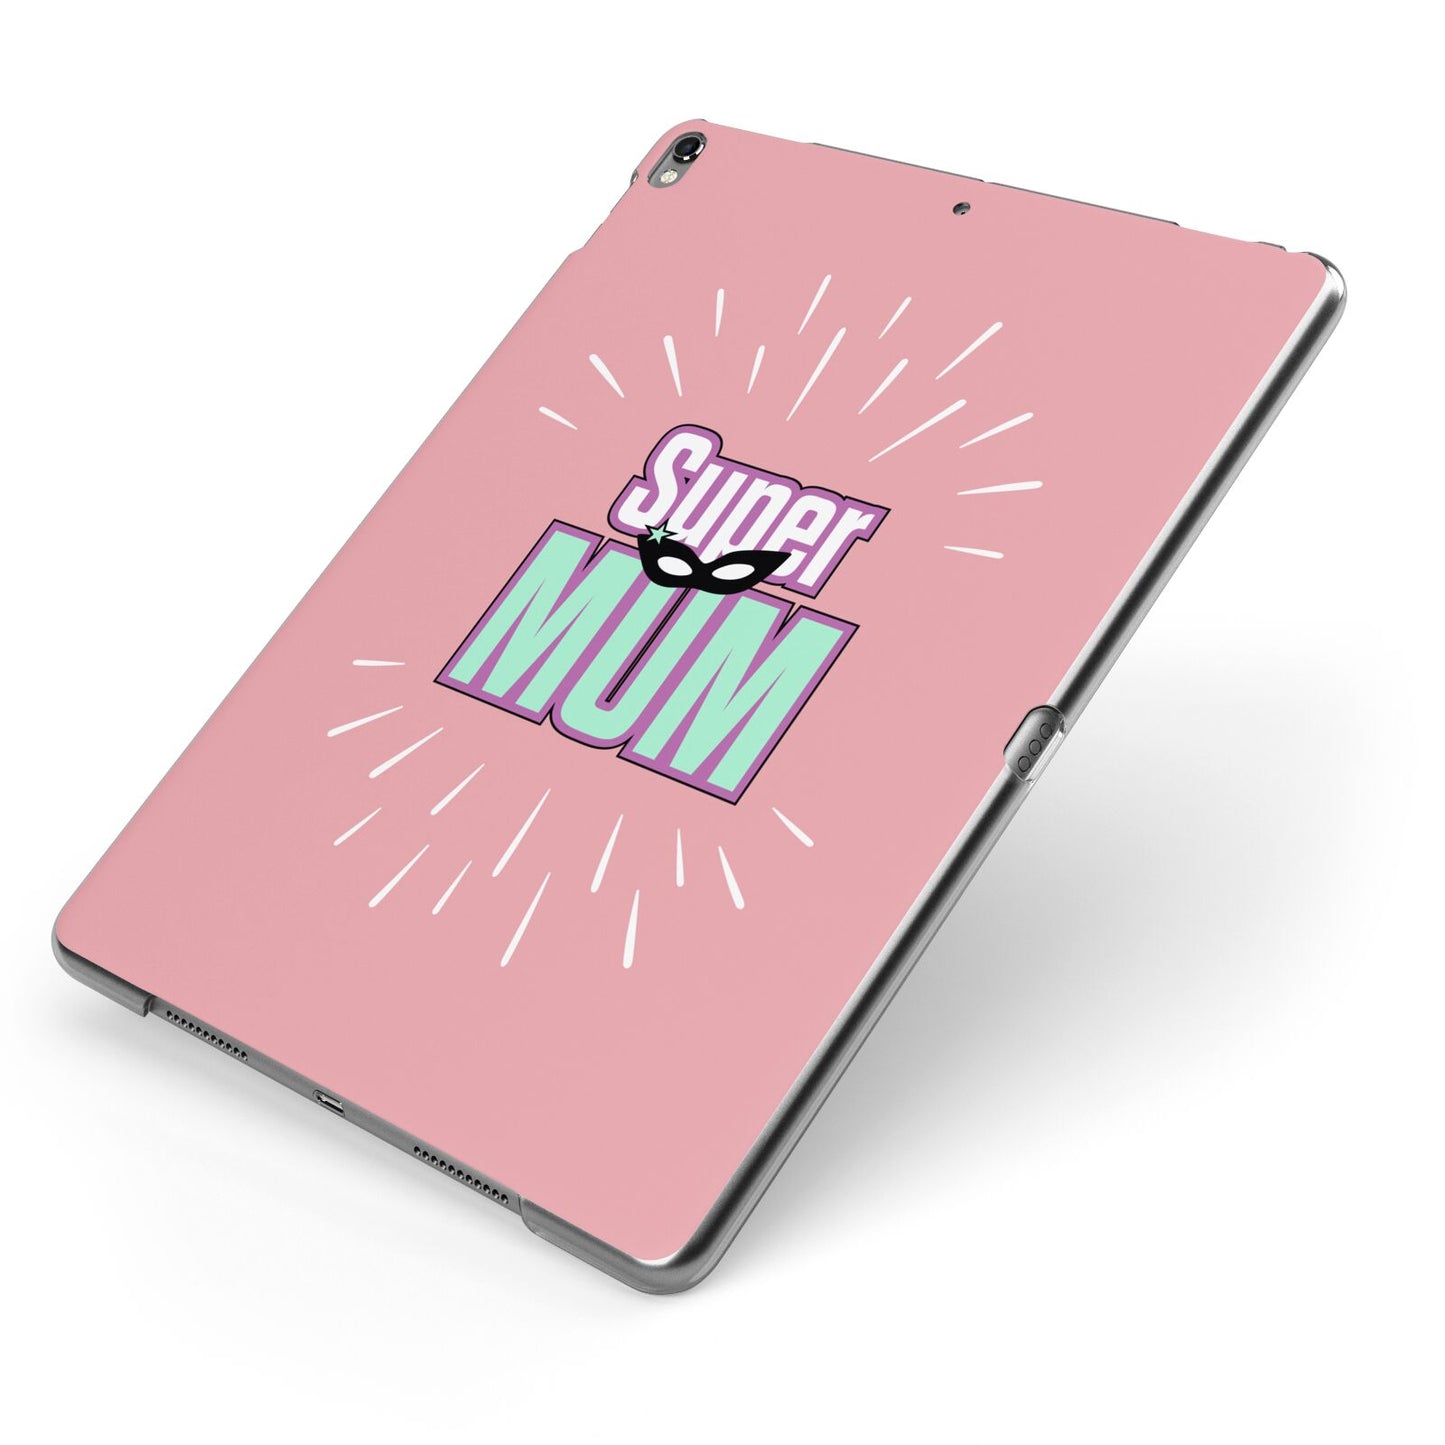 Super Mum Mothers Day Apple iPad Case on Grey iPad Side View